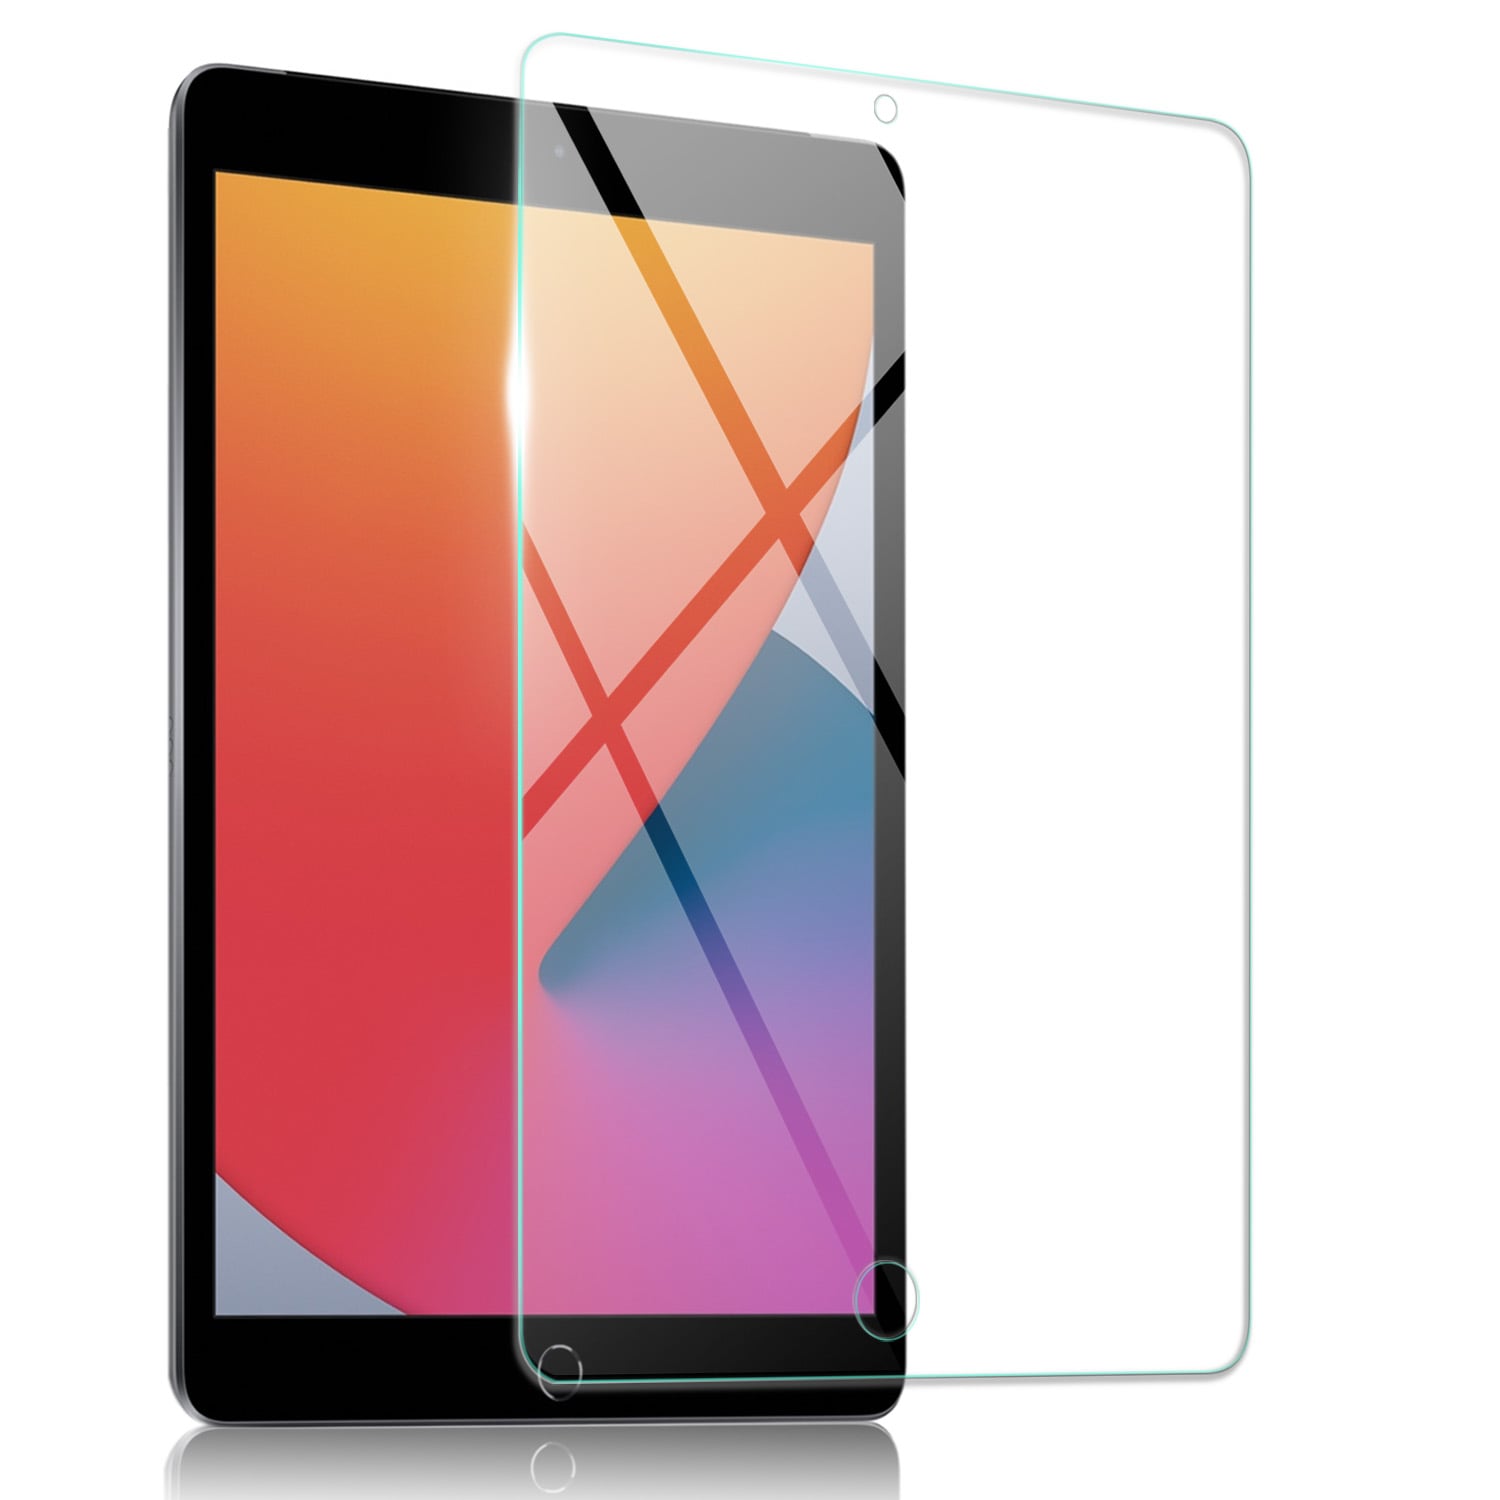 Tough on iPad 9 / 8 / 7th Gen 10.2" Tempered Glass Screen Protector